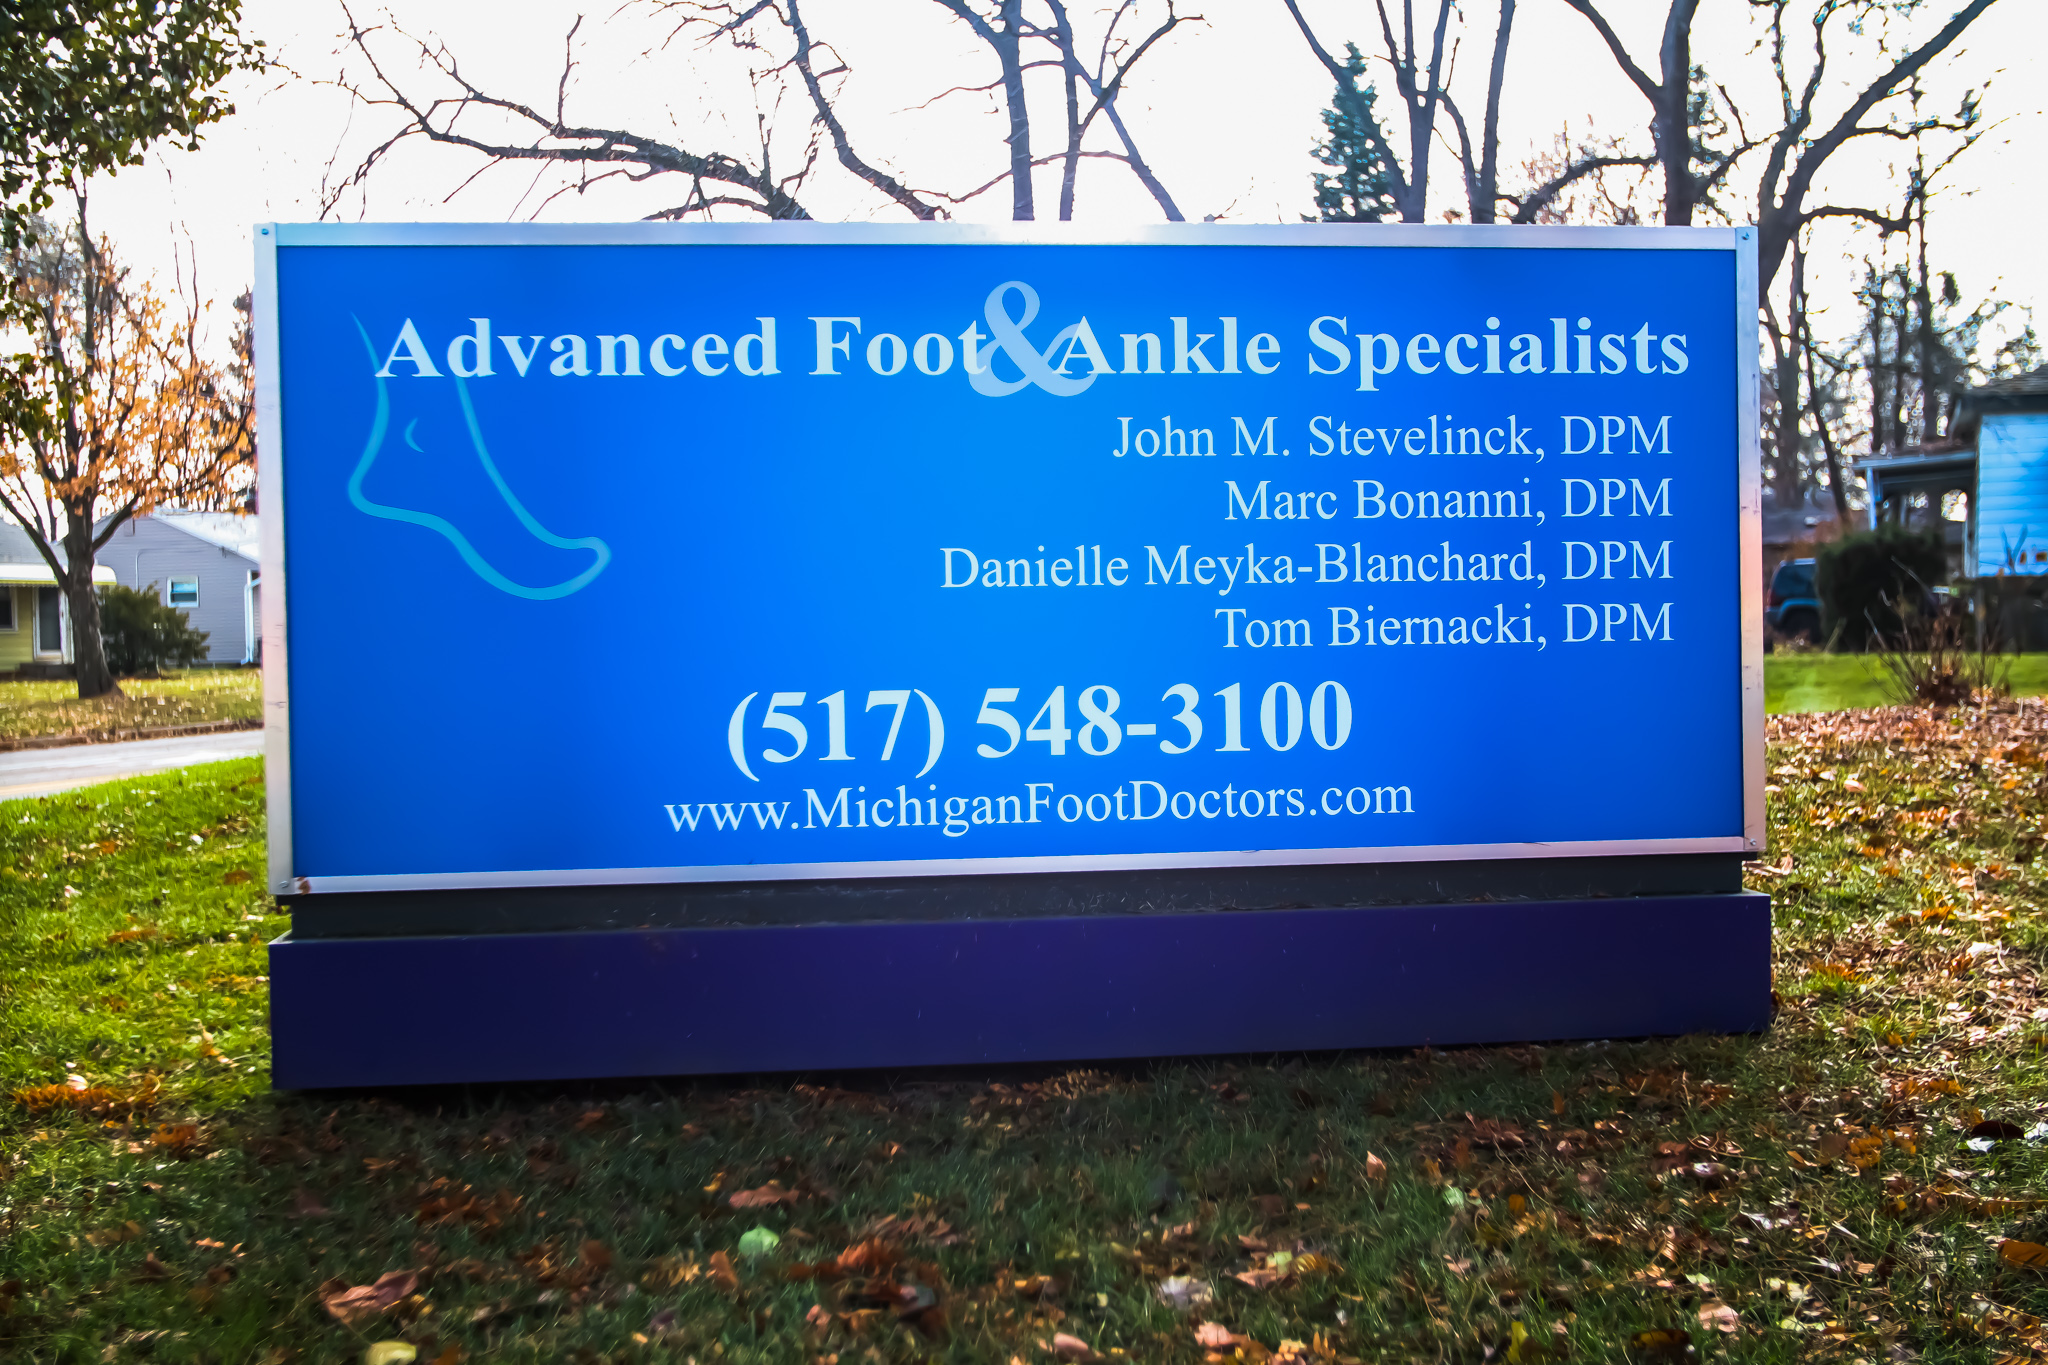 Advanced Foot & Ankle Specialists: Podiatrists and Foot Doctors in Brighton Michigan, Howell Michigan and Dexter Michigan.